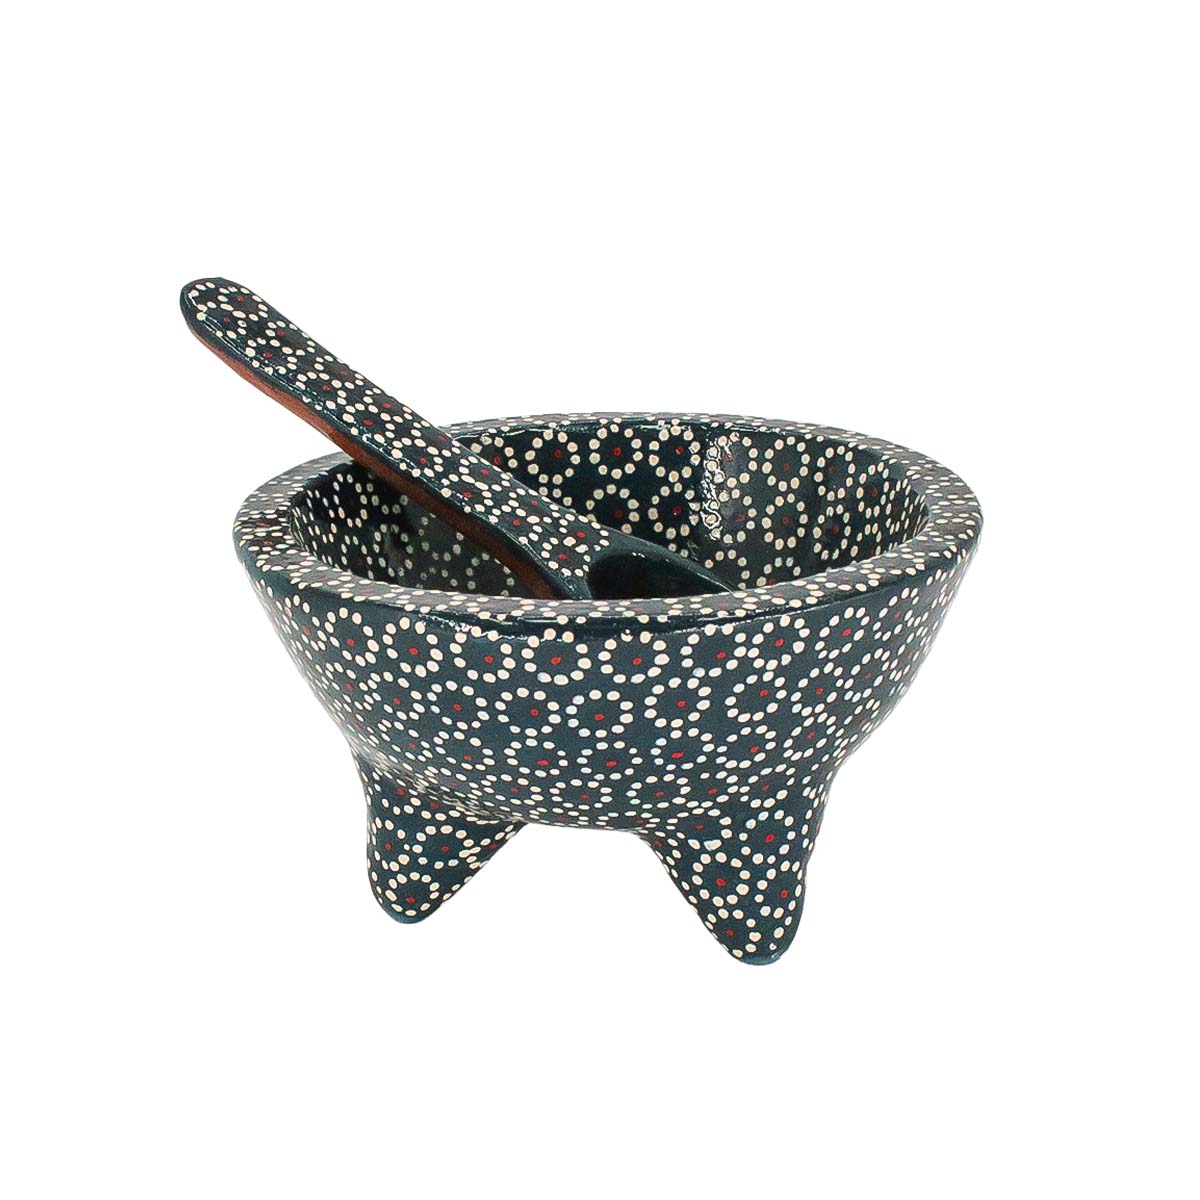 Capula Molcajete Clay Bowl and Matching Spoon - 5